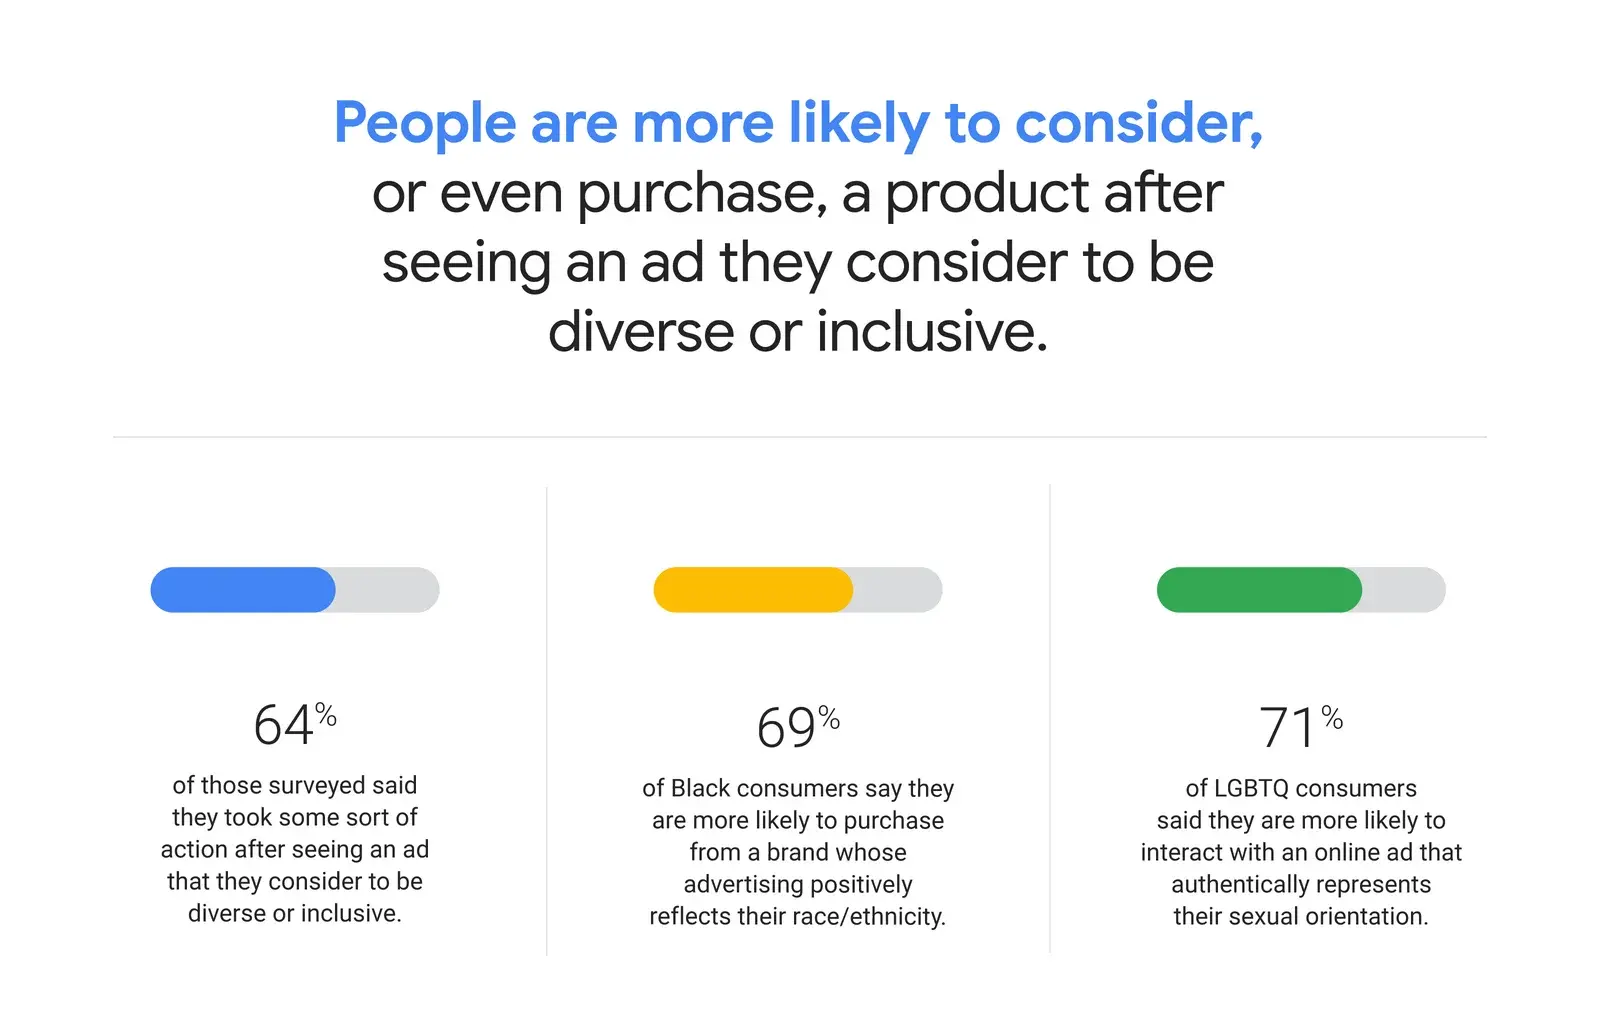 Importance of inclusive and diverse marketing ads